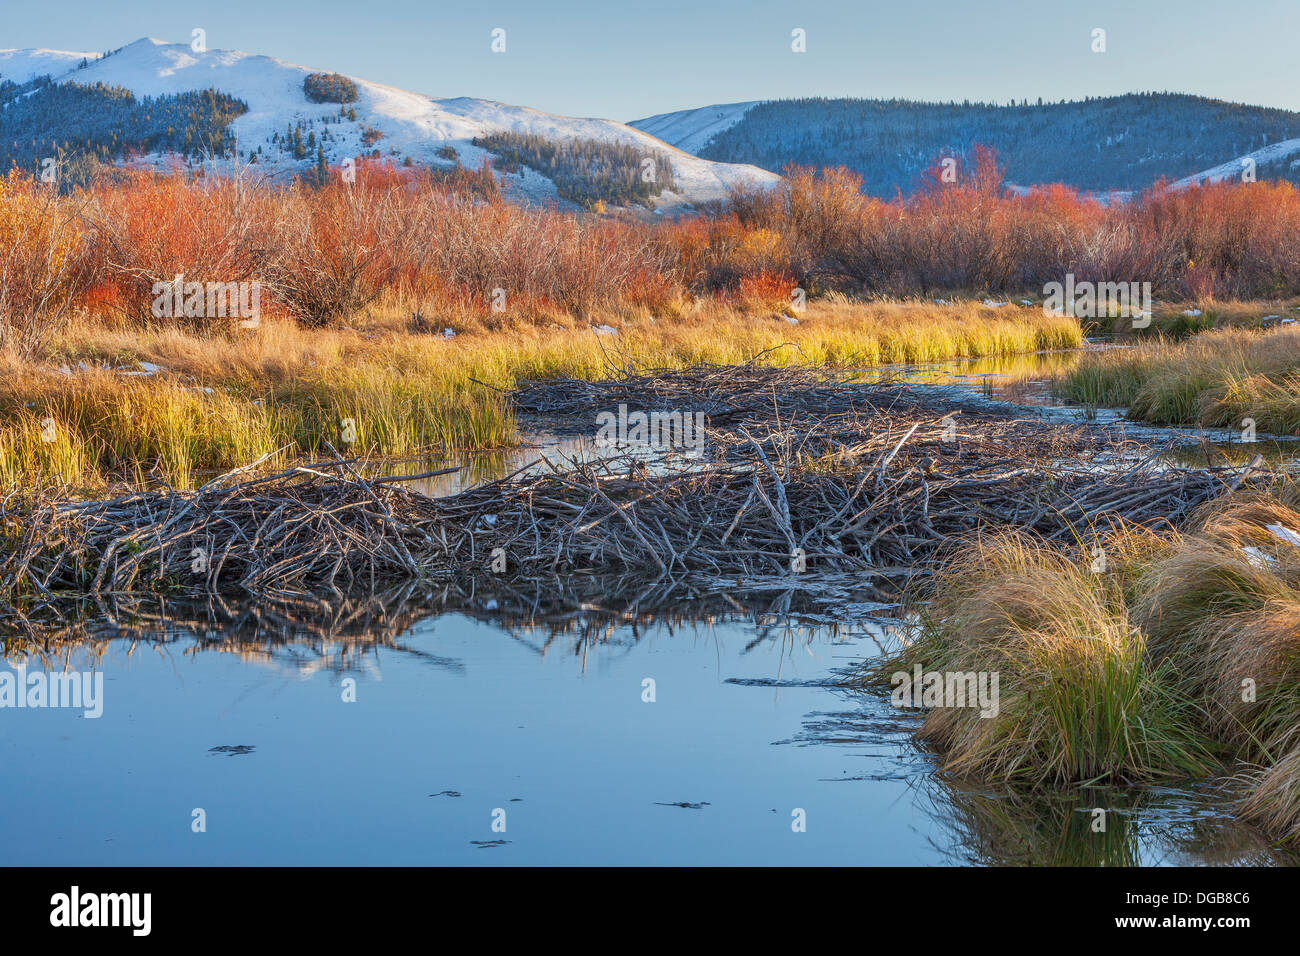 beaver dam on North Platte River above Northgate Canyon near Cowdrey, Colorado, in a fall scenery Stock Photo